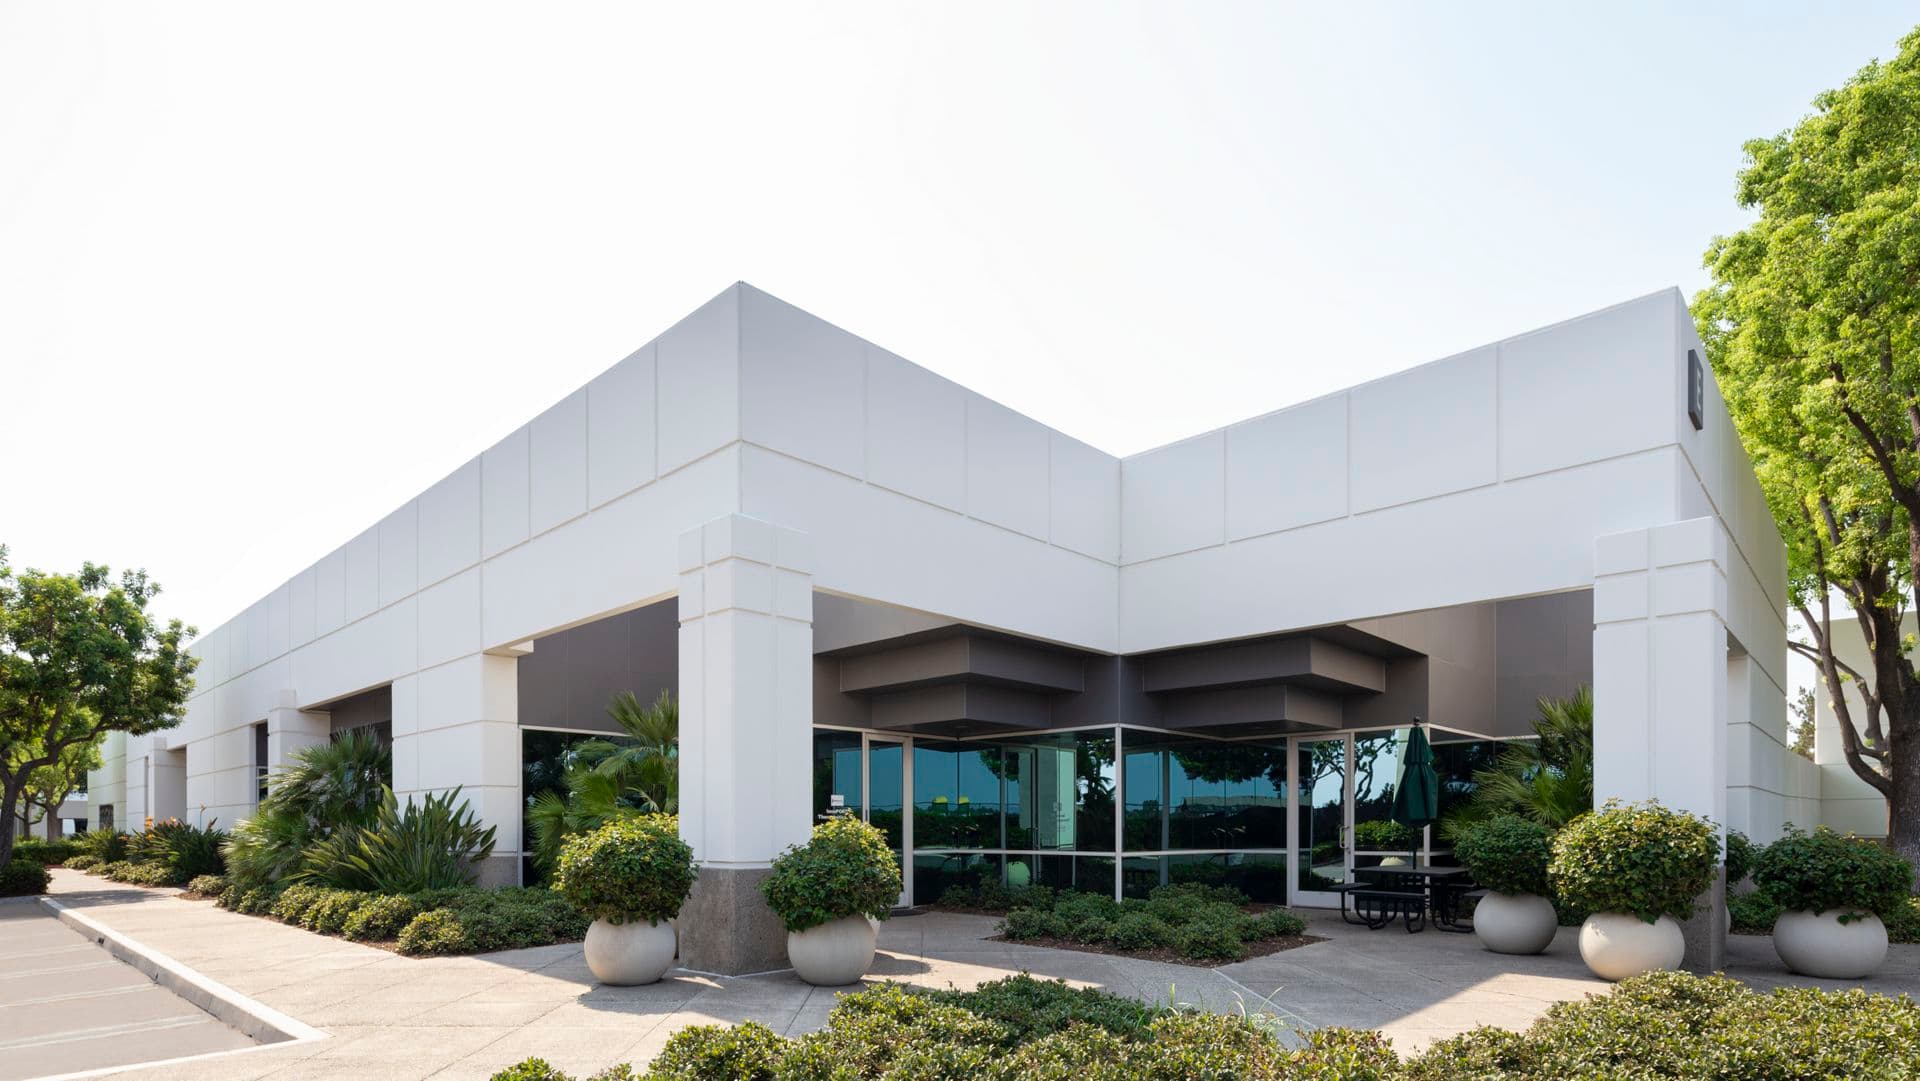 Exterior building photography at One Technology Park in Irvine, CA